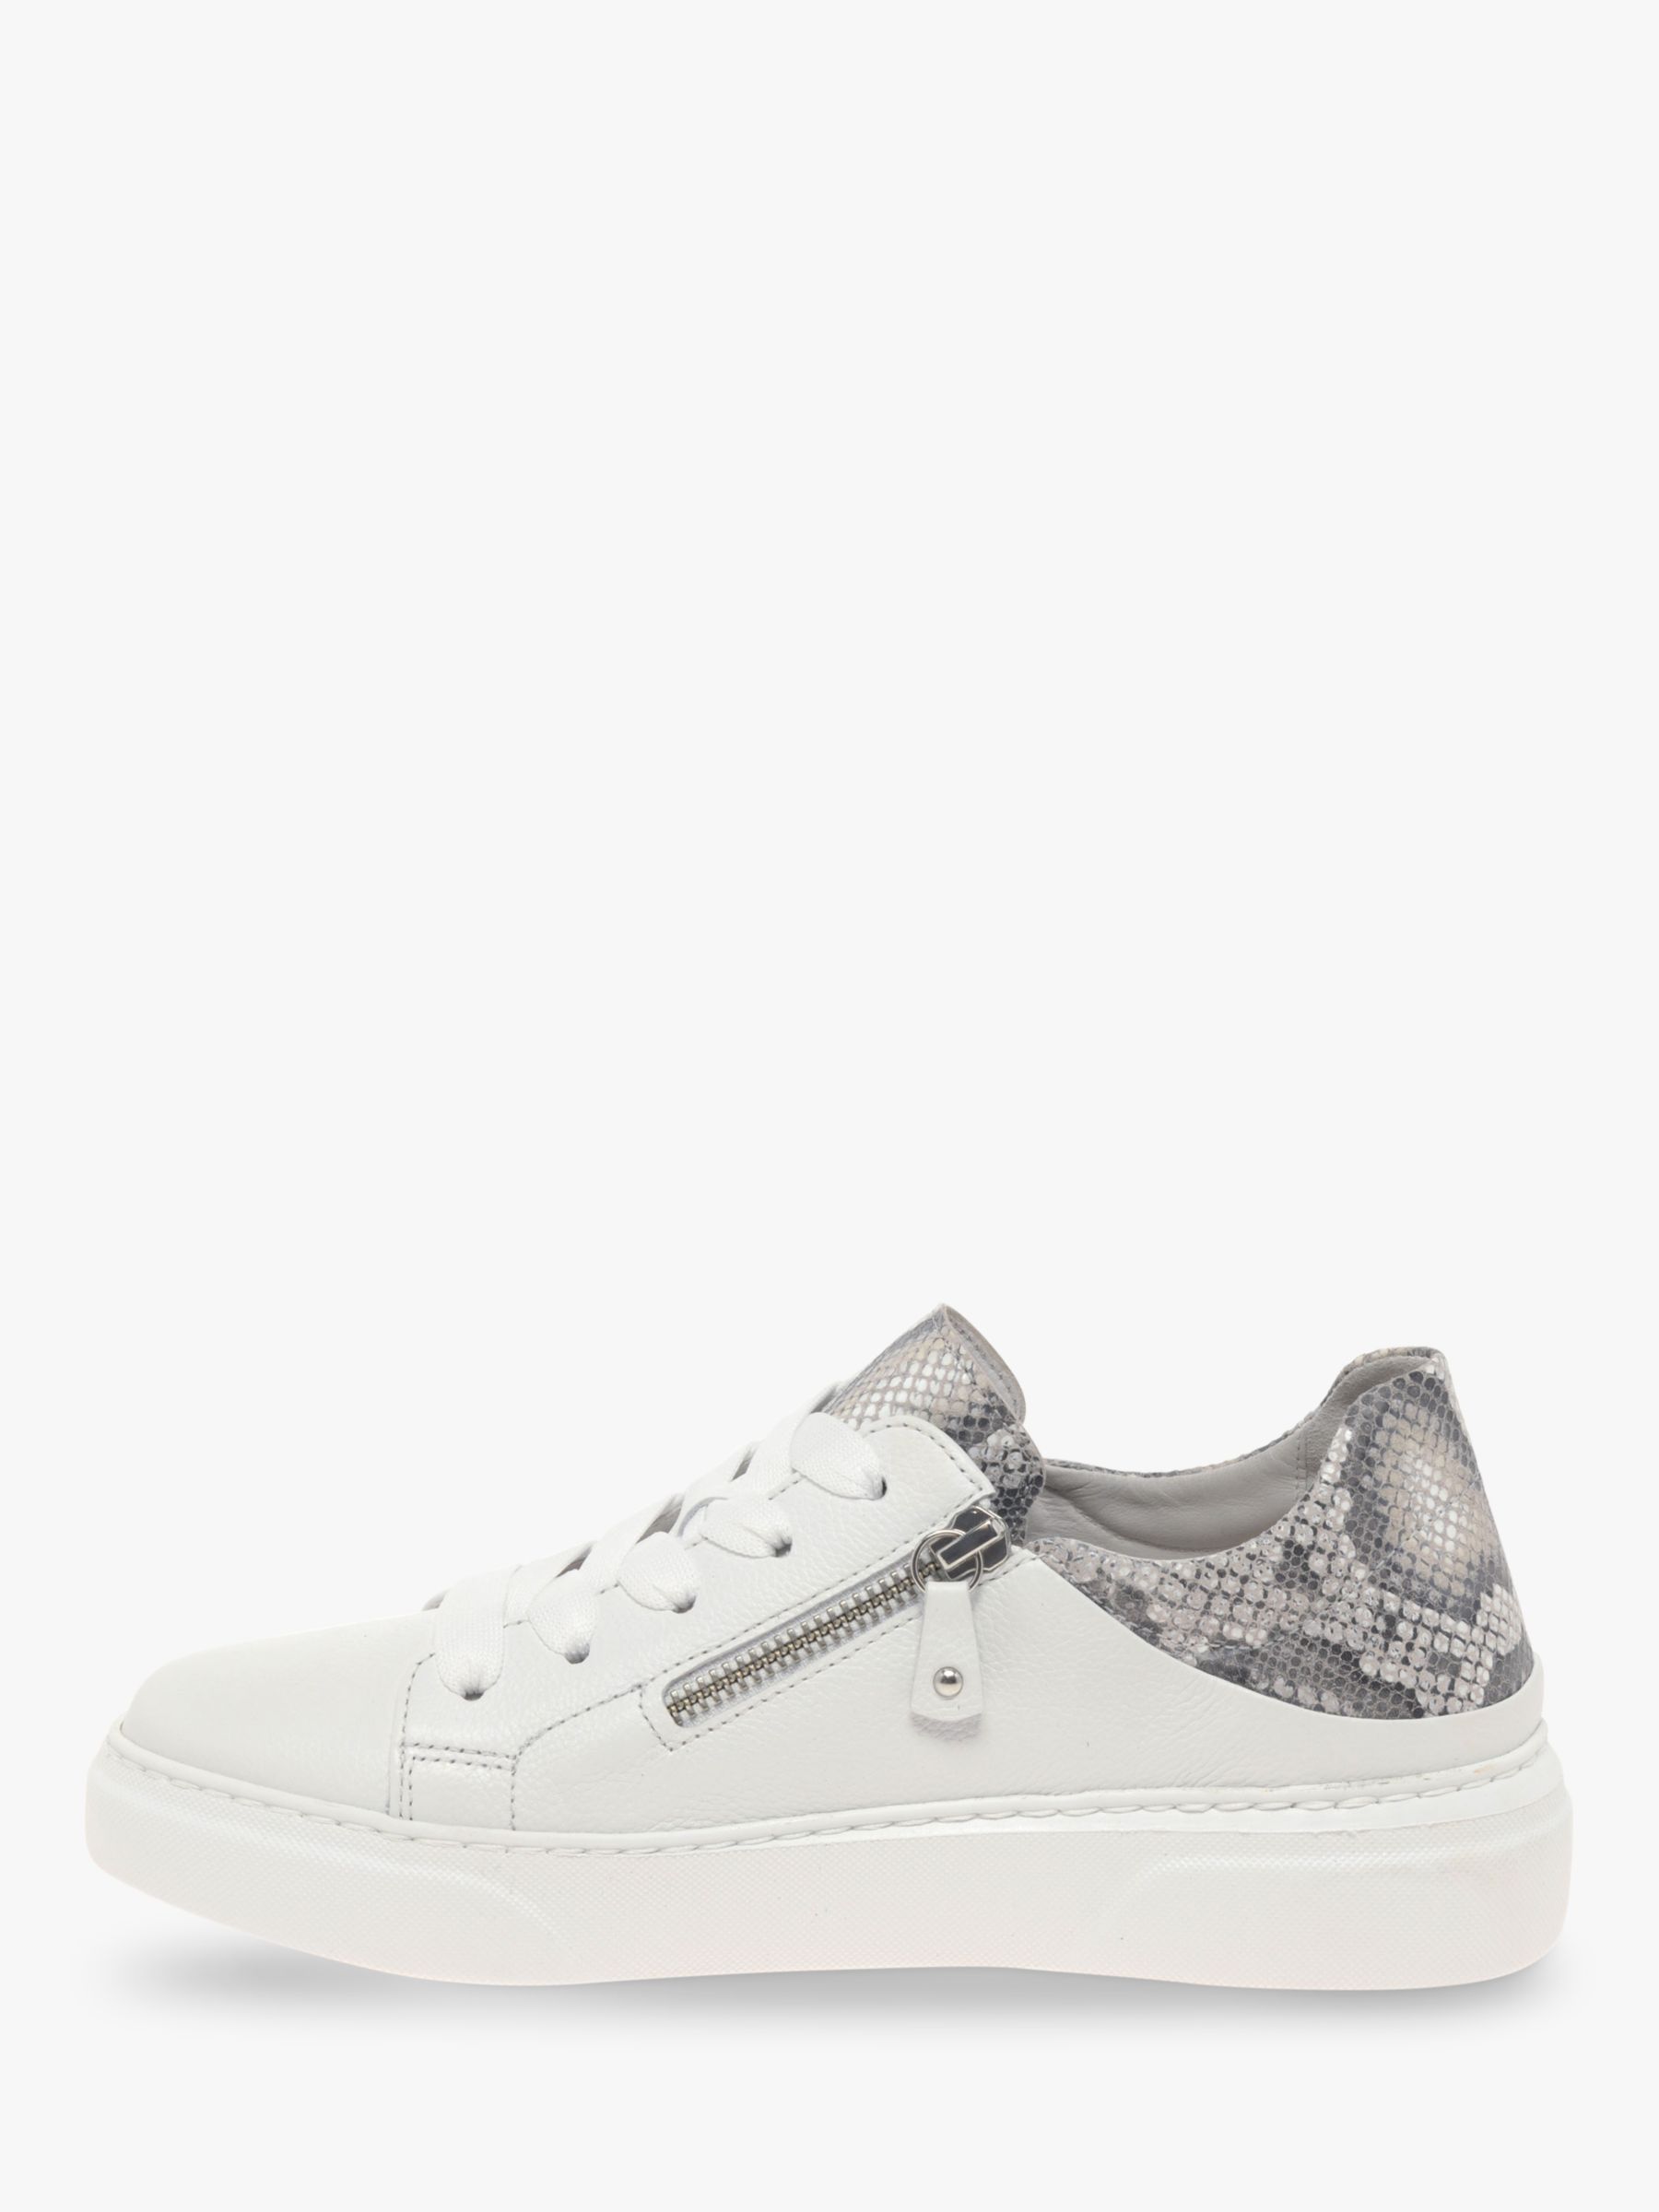 Gabor Sequence Leather Snake Print Trainers, White